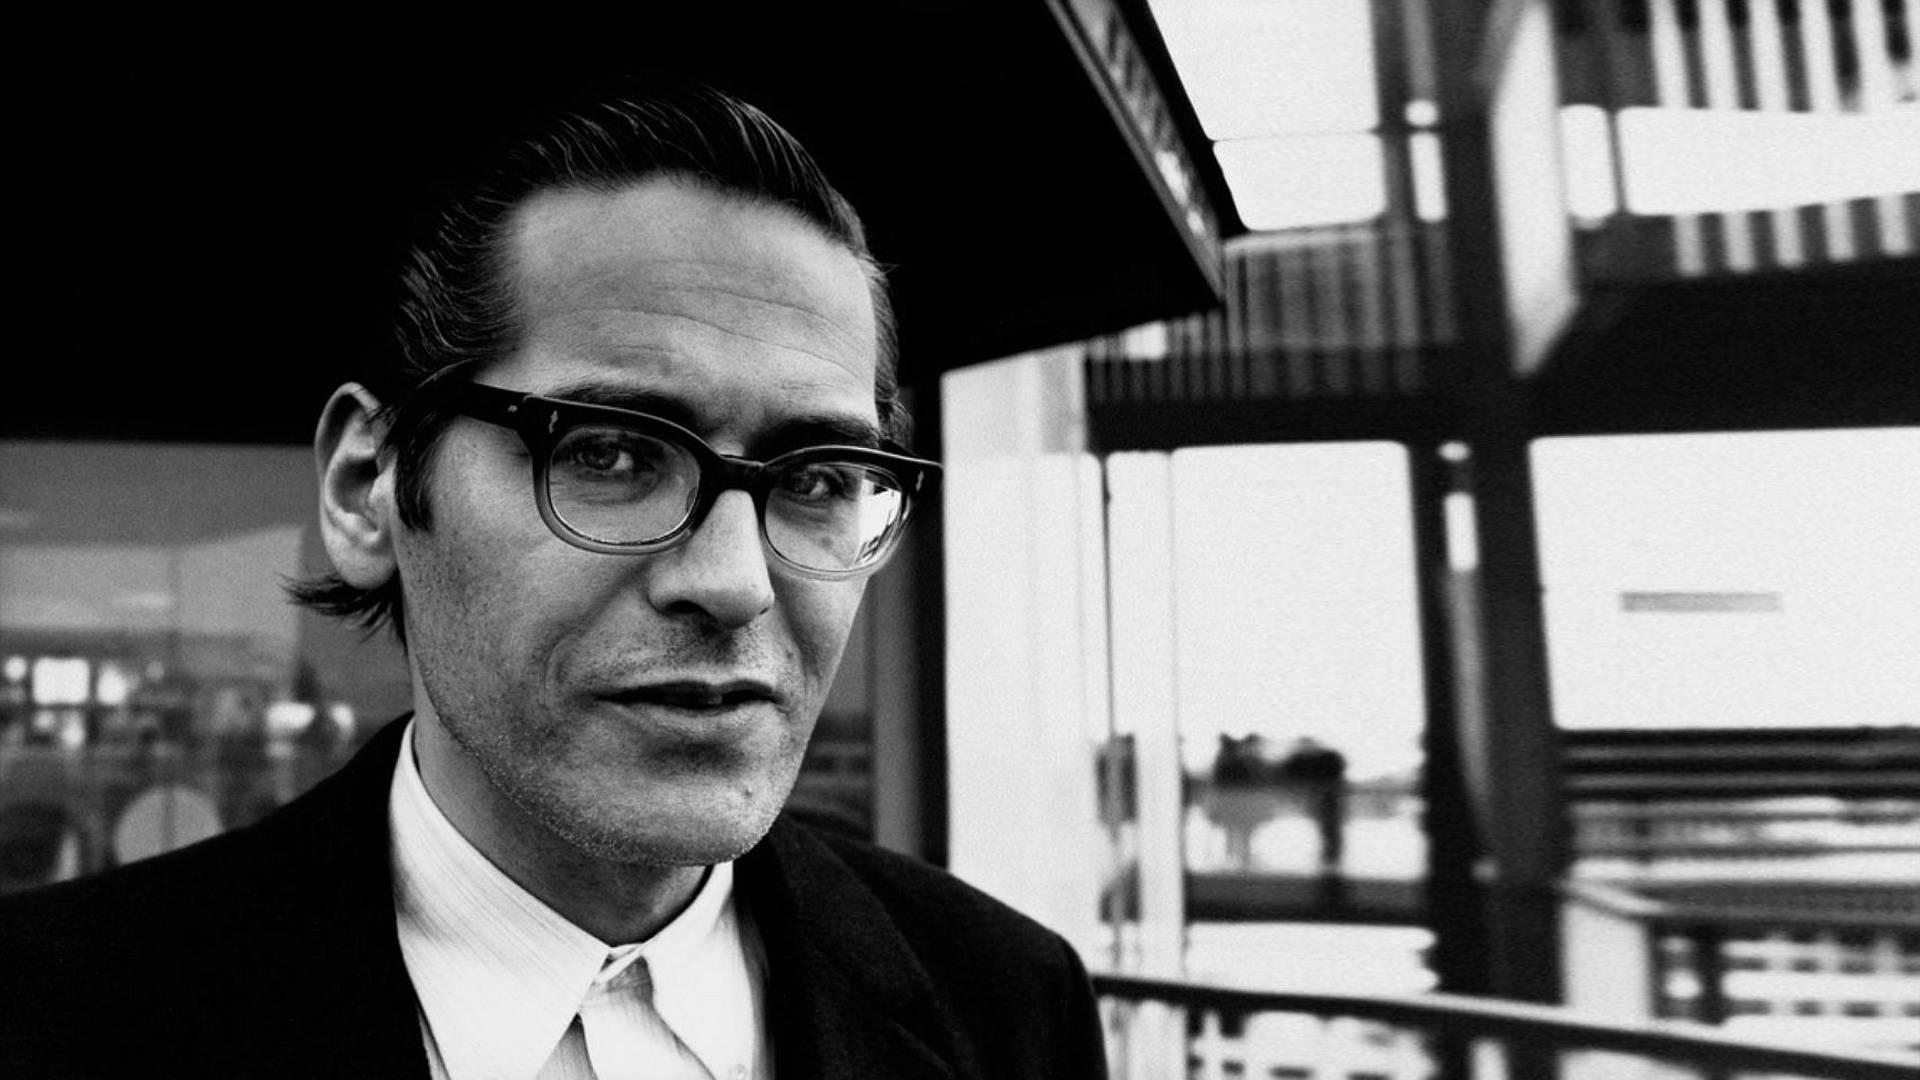 Hårstiljazzartist Bill Evans. (note: It's Difficult To Translate This Sentence Without Additional Context Or Information About How It Relates To Computer Or Mobile Wallpaper.) Wallpaper